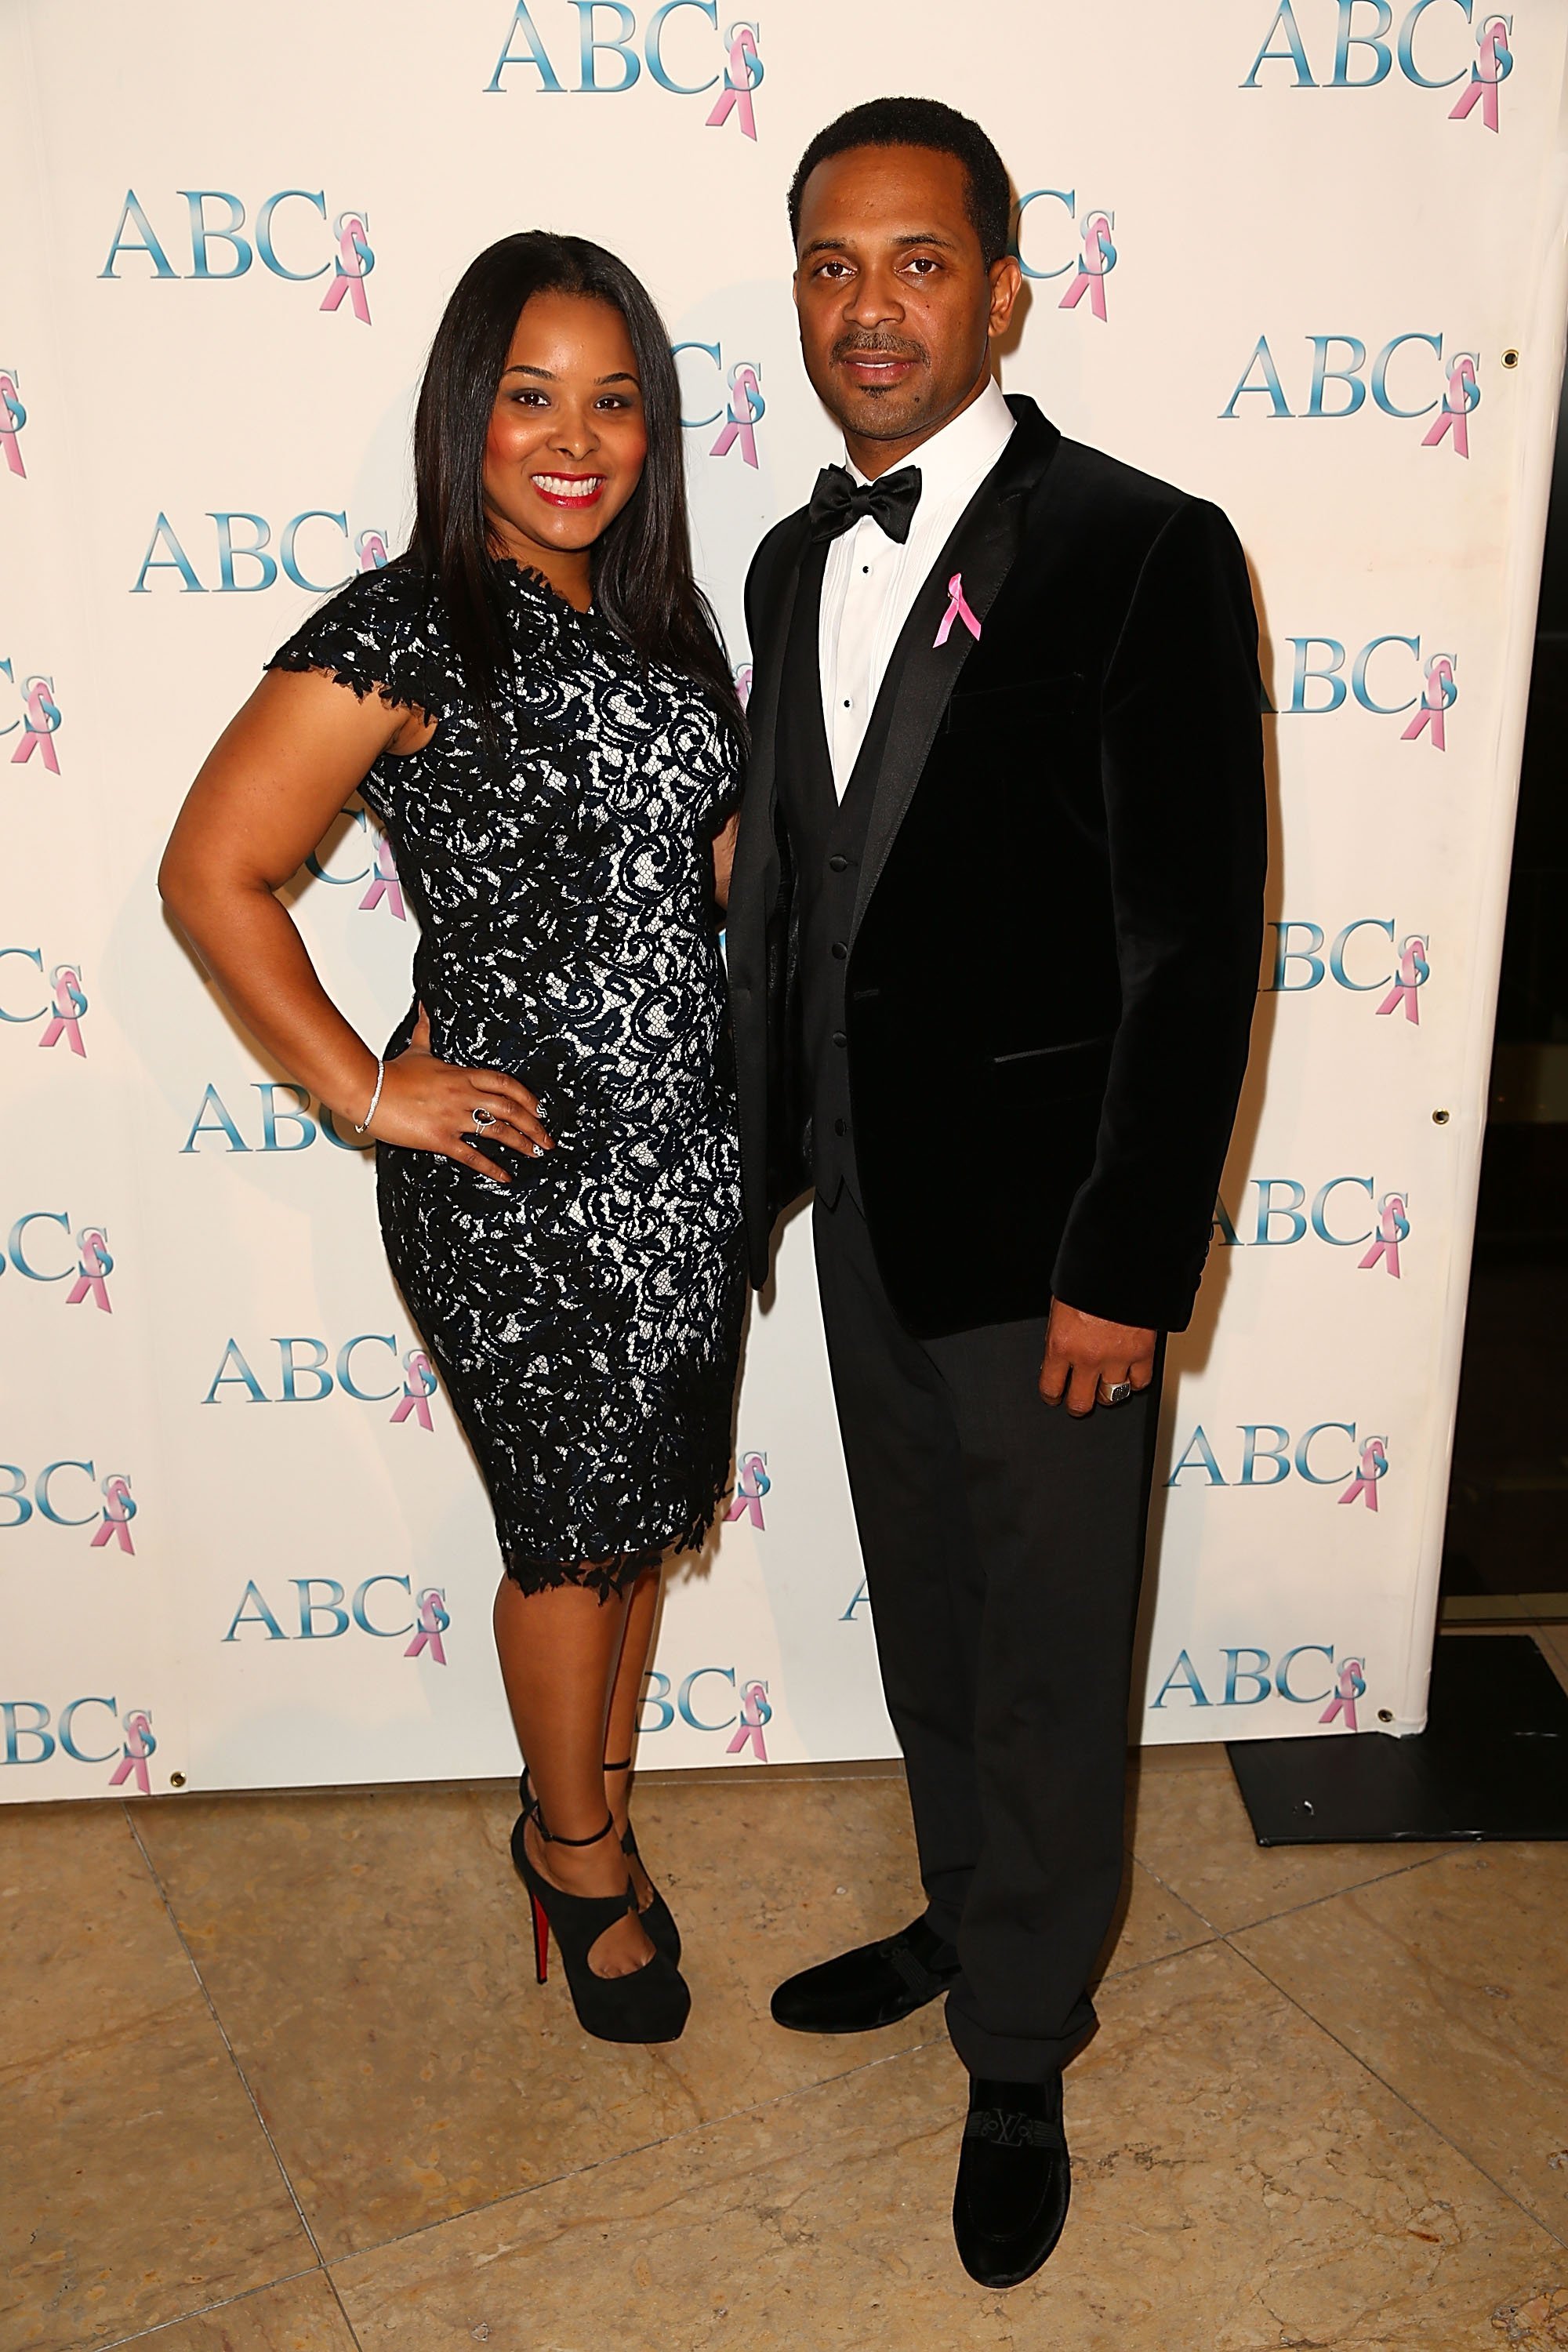 (Before the split) Mike Epps & Mechelle McCain at The Beverly Hilton Hotel in California on Nov. 23, 2013. | Photo: Getty Images